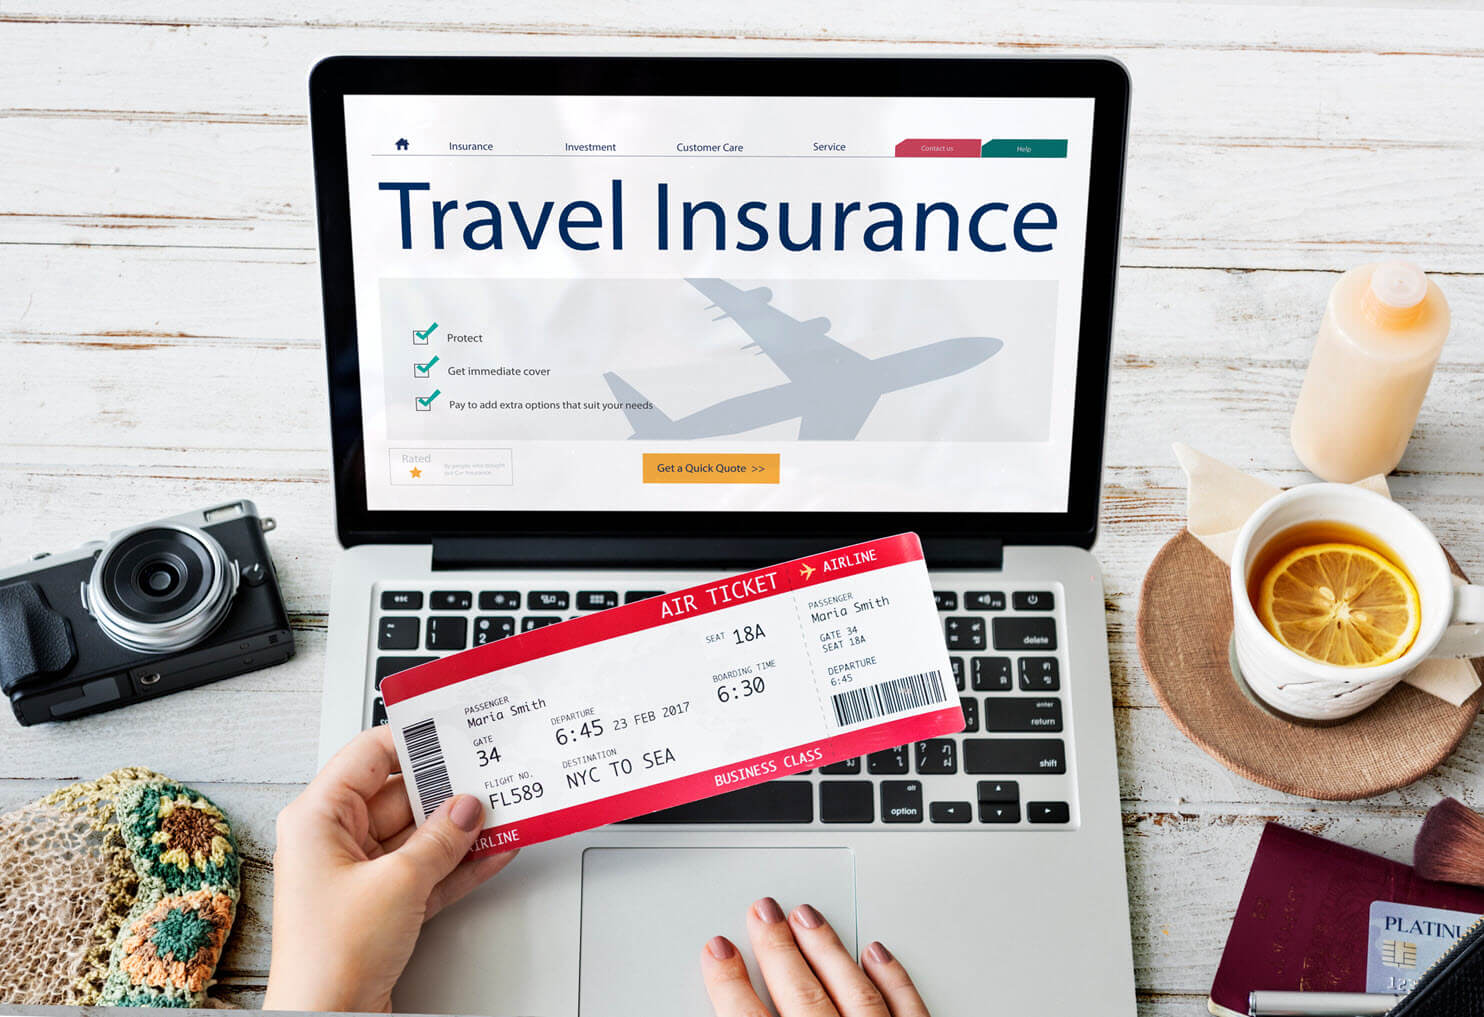 Here's Everything You Need to Know about Travel Insurance in 10 Minutes